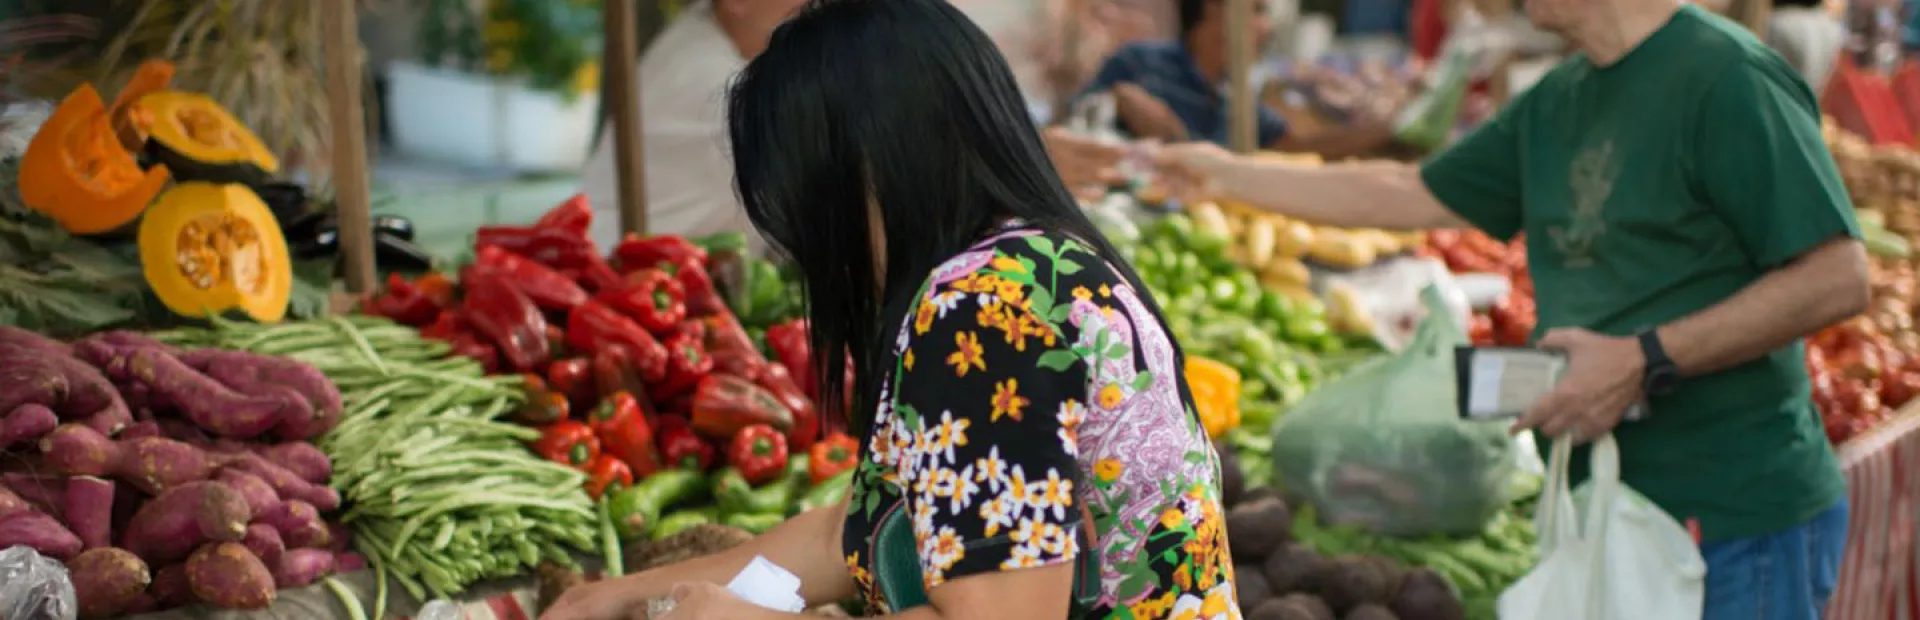 Woman buying vegetables on a market in Brazil